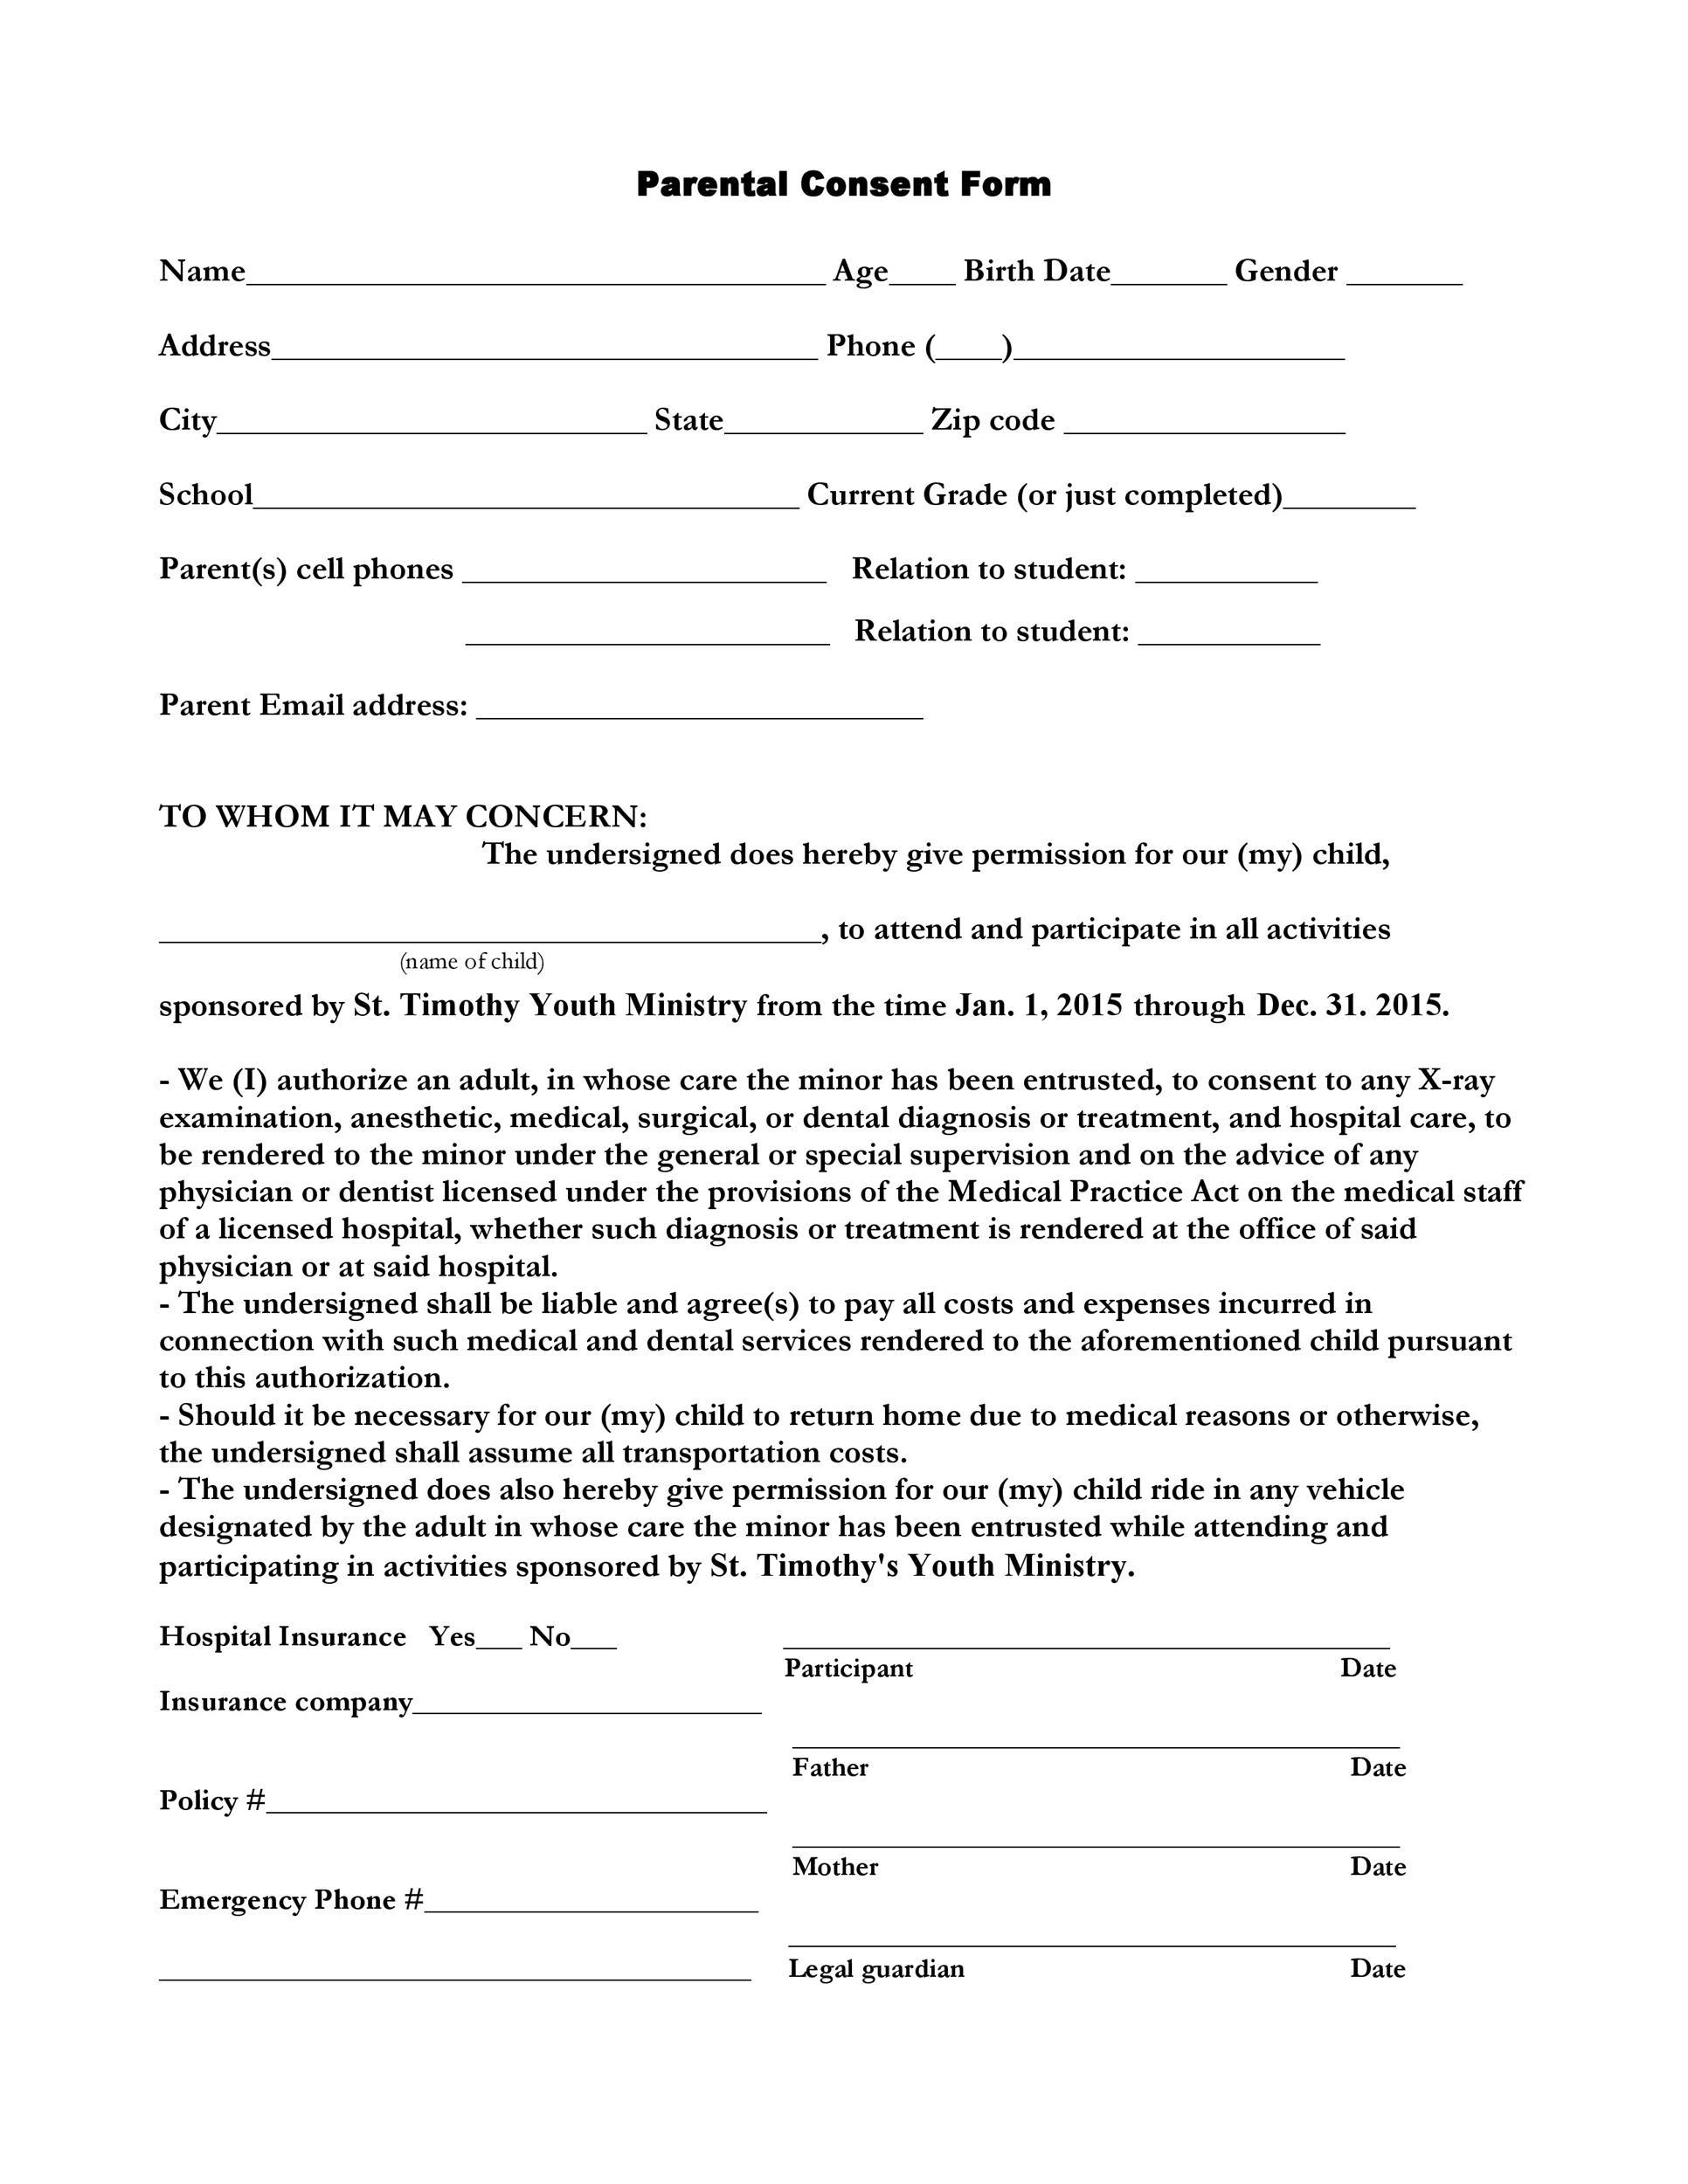 45 New Consent Form For Children Photography Hd